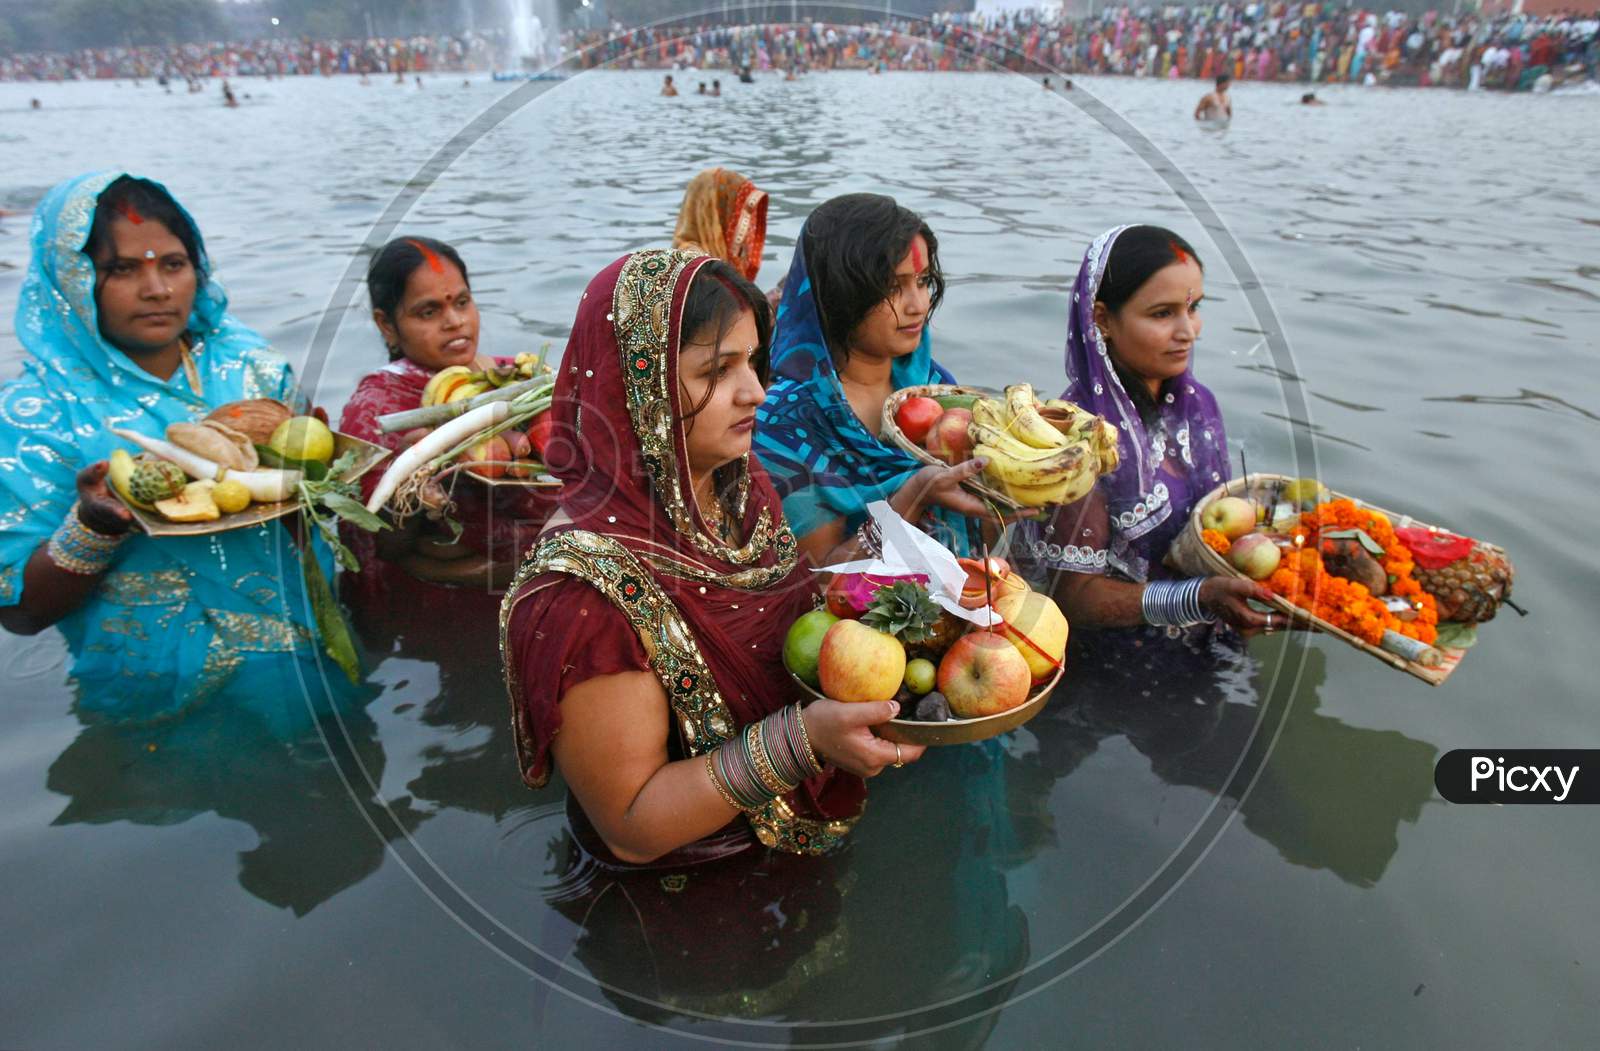 Hindu Devotees Offer Prayers To The Sun God During The Hindu Religious Festival Chhat Puja In Chandigarh